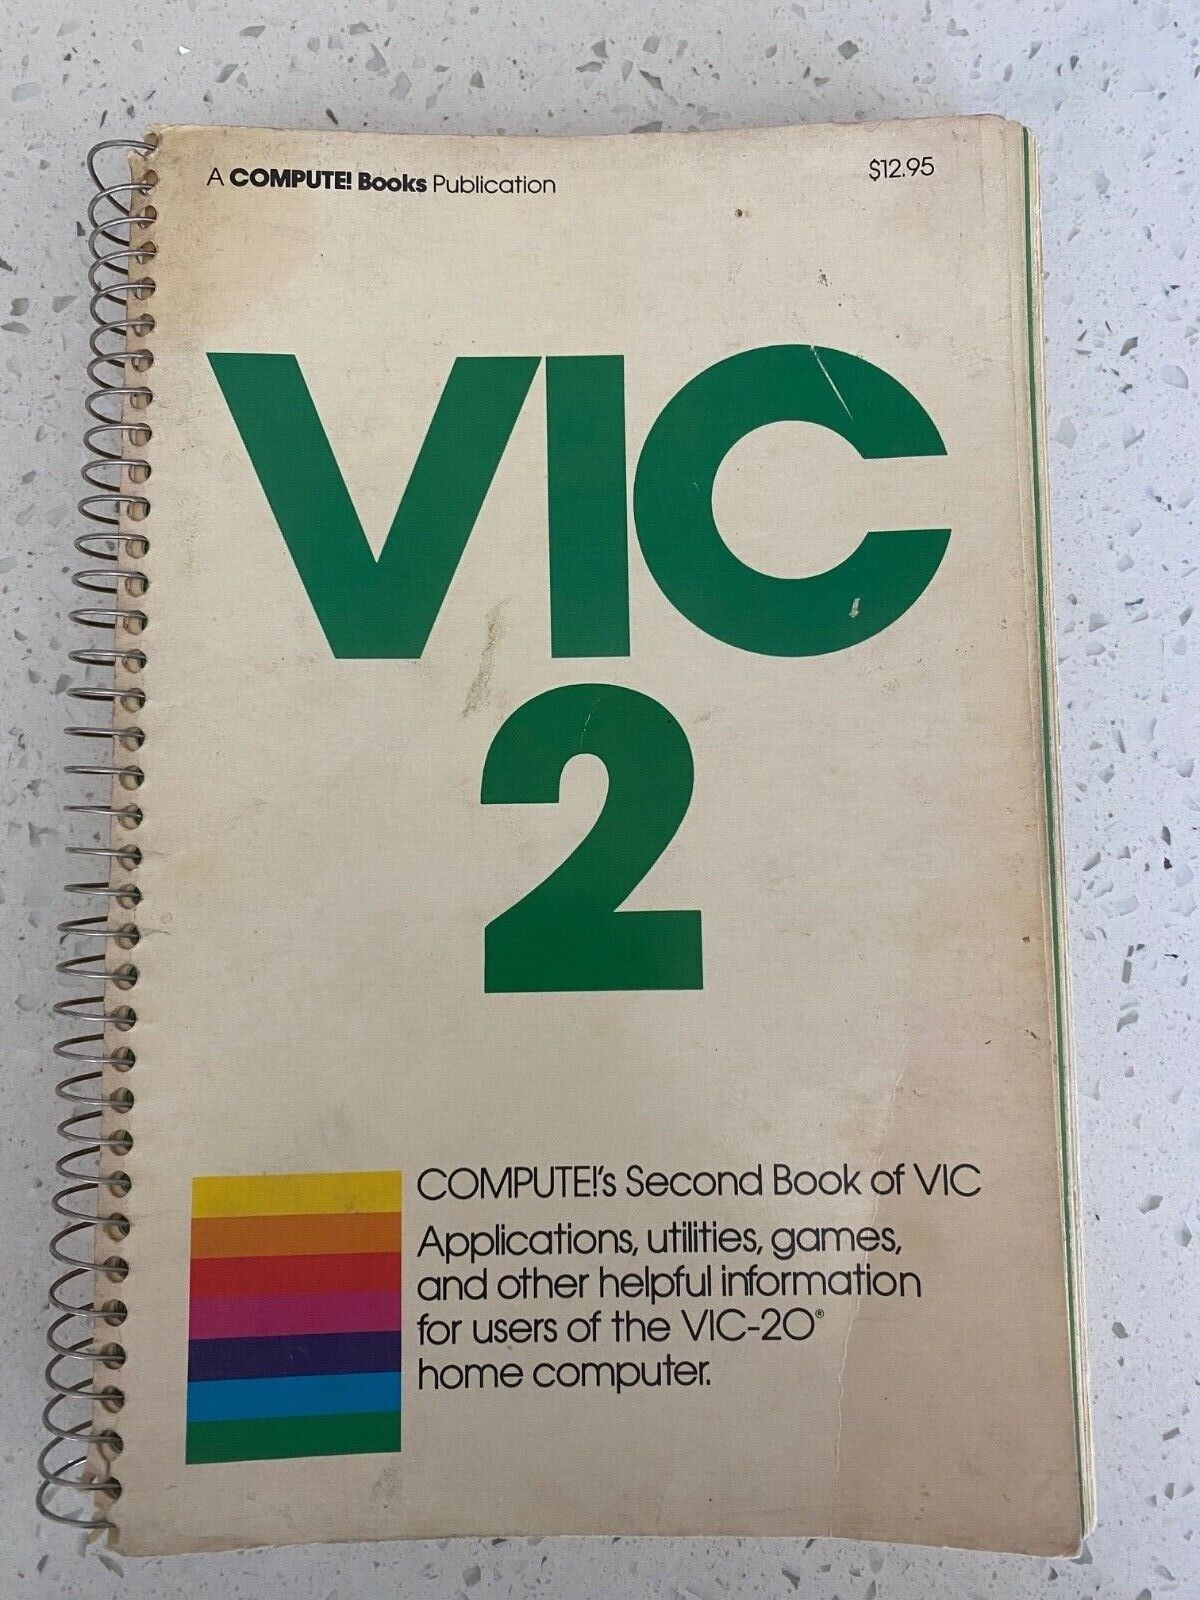 COMPUTES VIC 2 SECOND BOOK OF VINTAGE COMMODORE COMPUTER BOOK